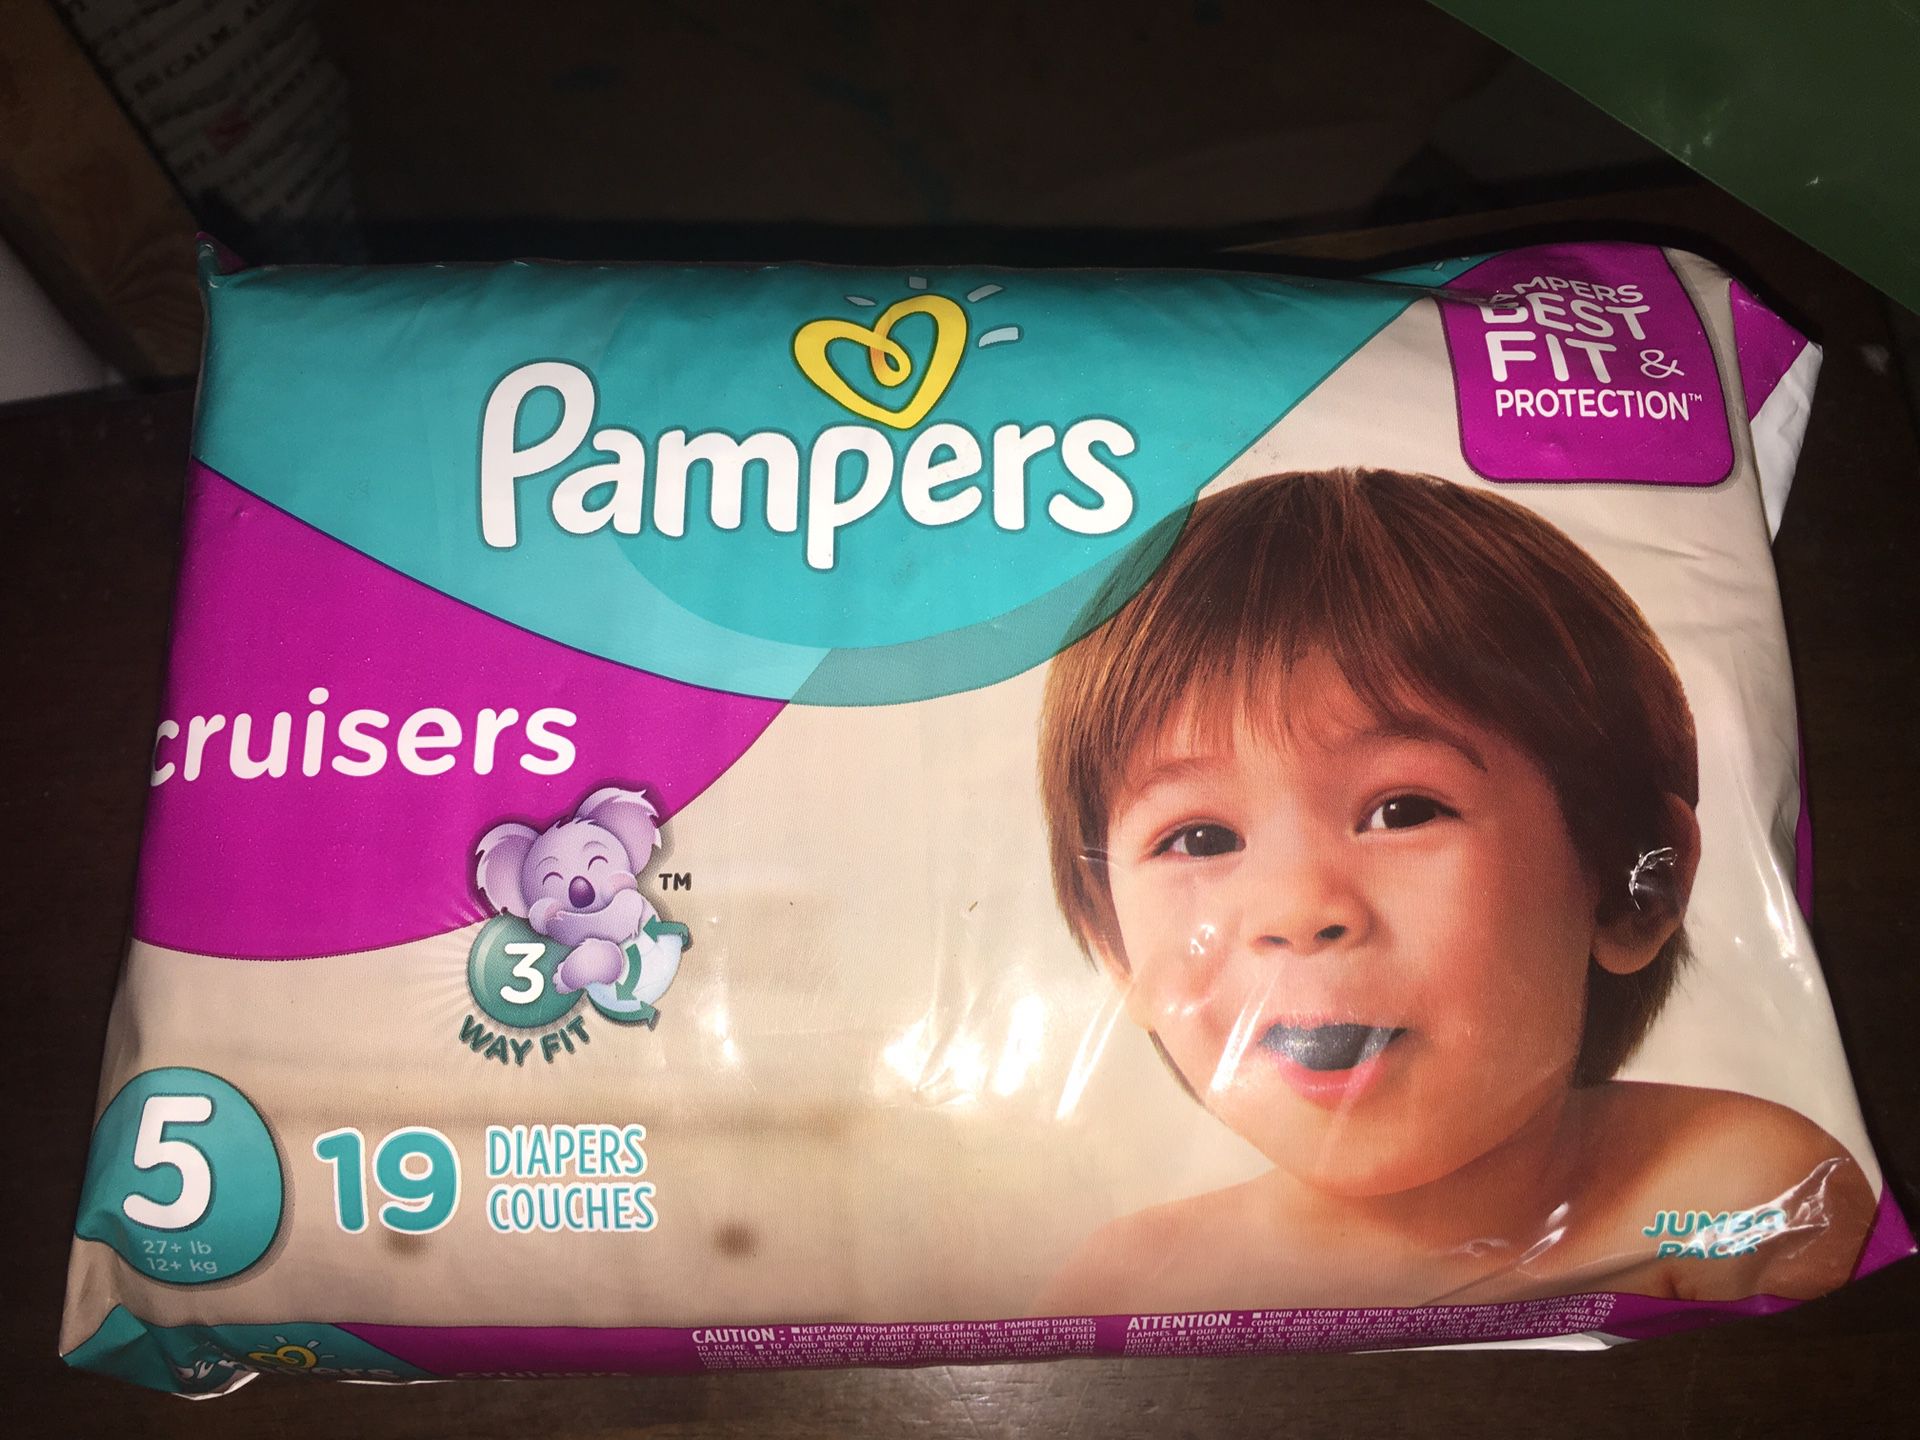 Pampers cruisers